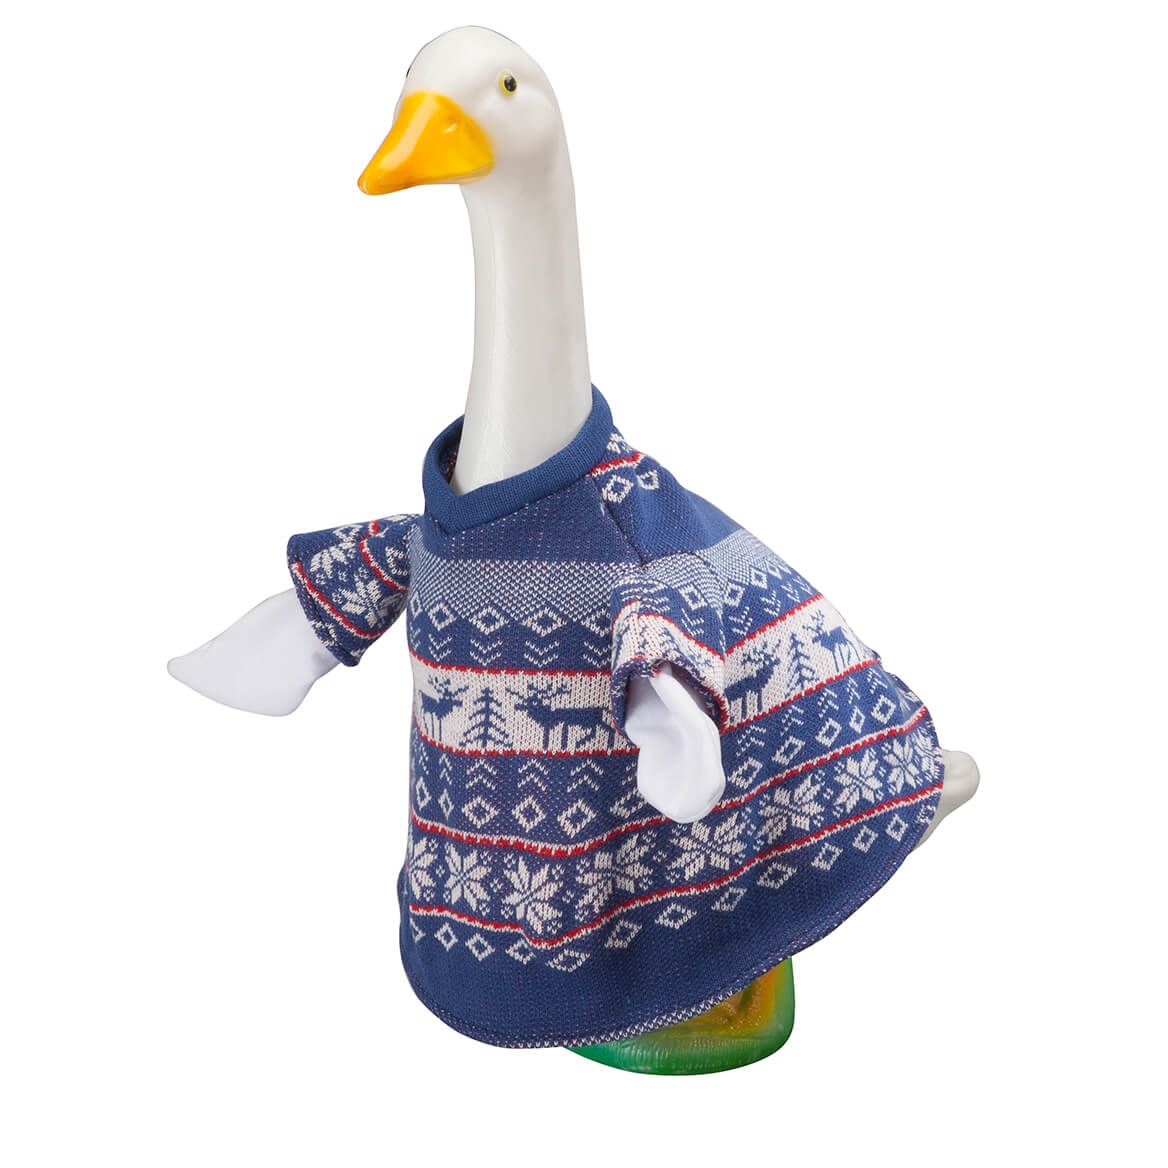 Blue and White Sweater Goose Outfit + '-' + 363610